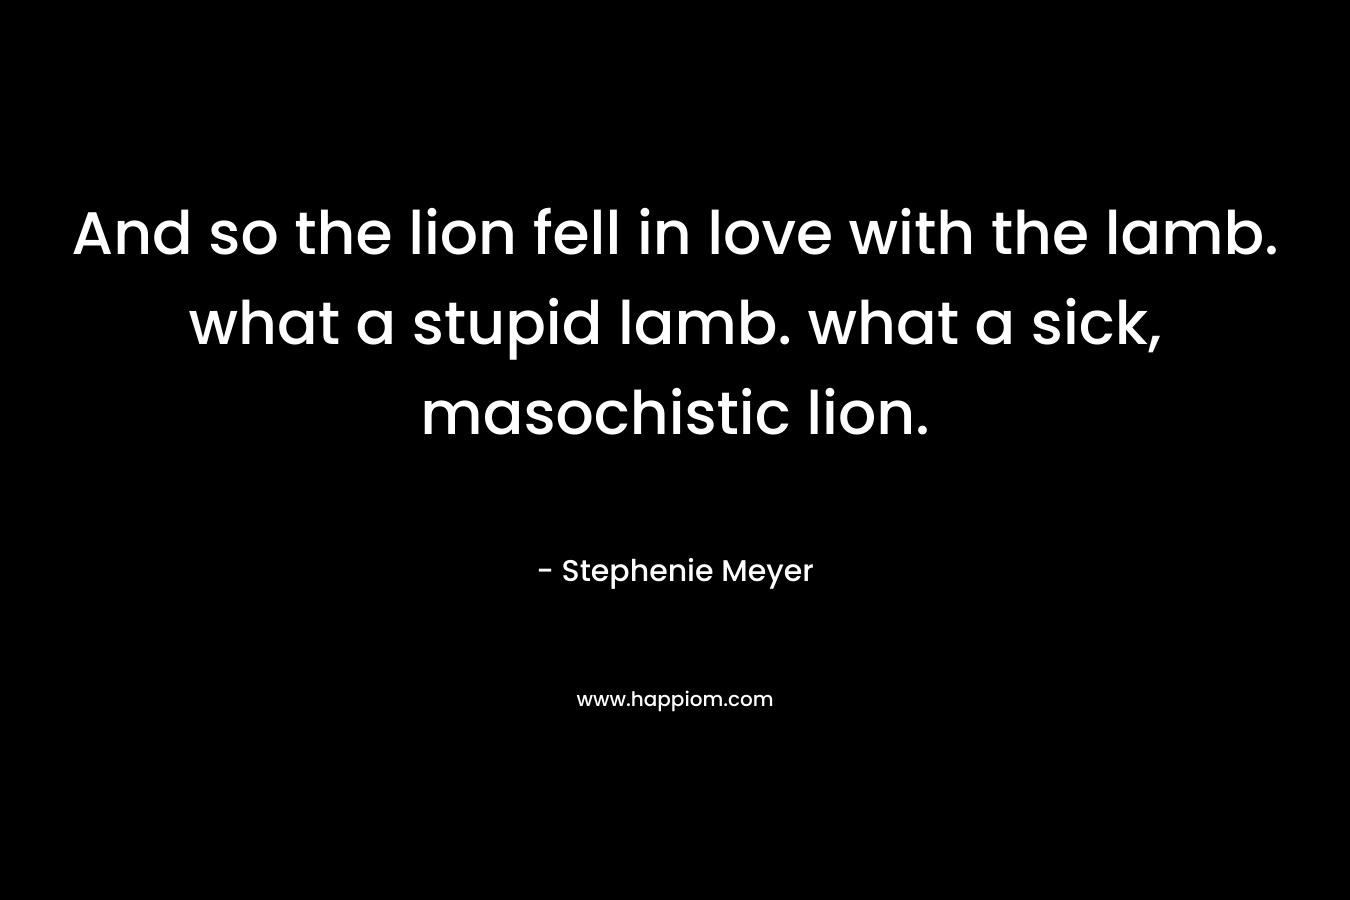 And so the lion fell in love with the lamb. what a stupid lamb. what a sick, masochistic lion.